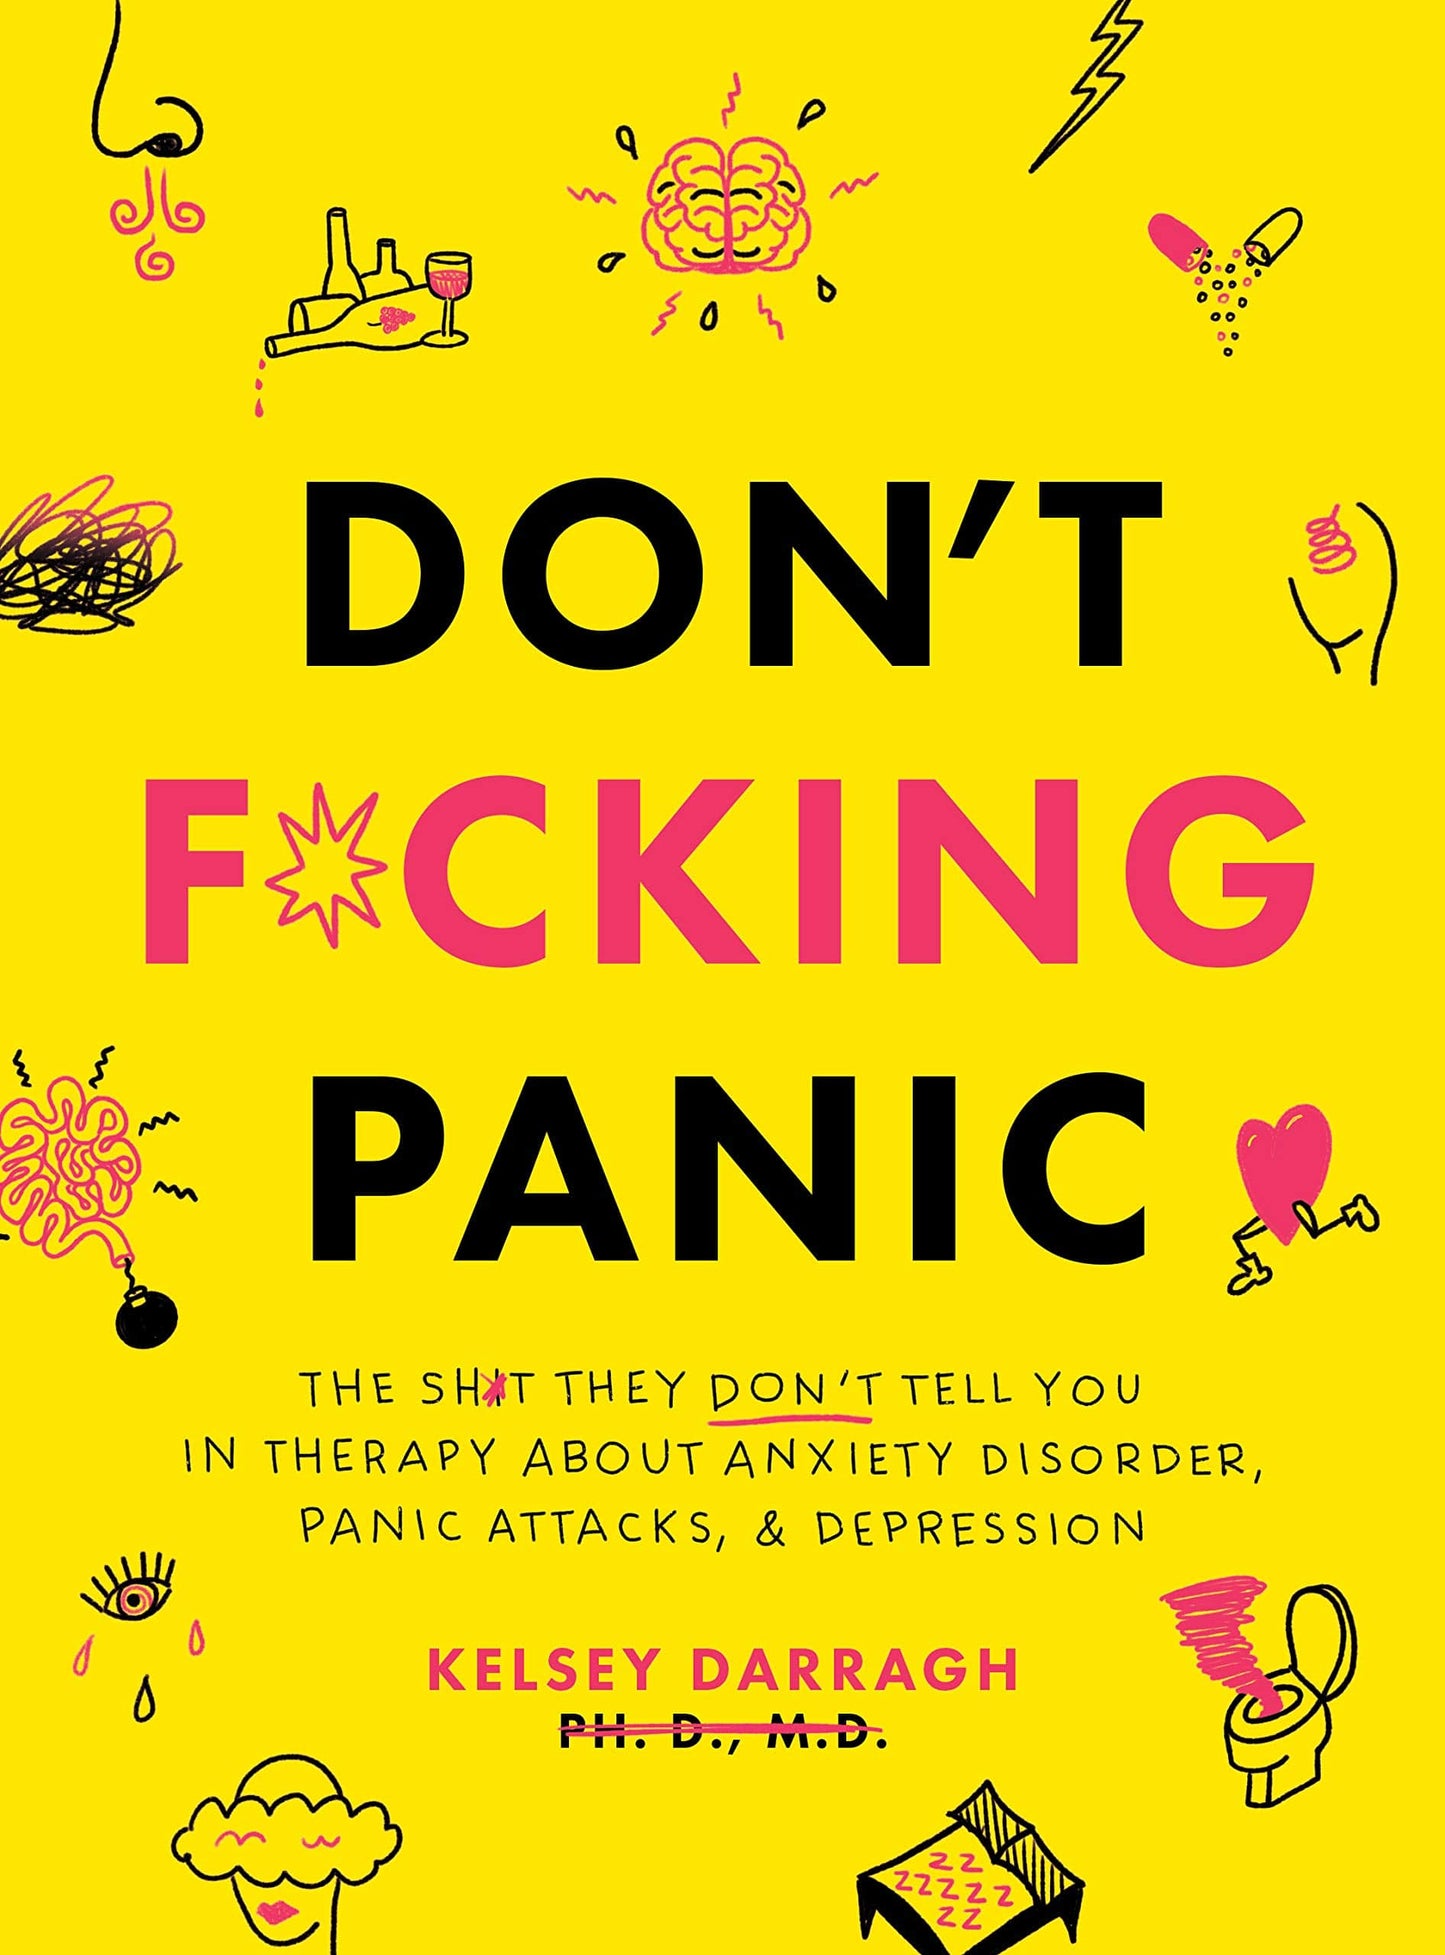 Don't F*cking Panic: The Shit They Don't Tell You in Therapy About Anxiety Disorder, Panic Attacks, & Depression